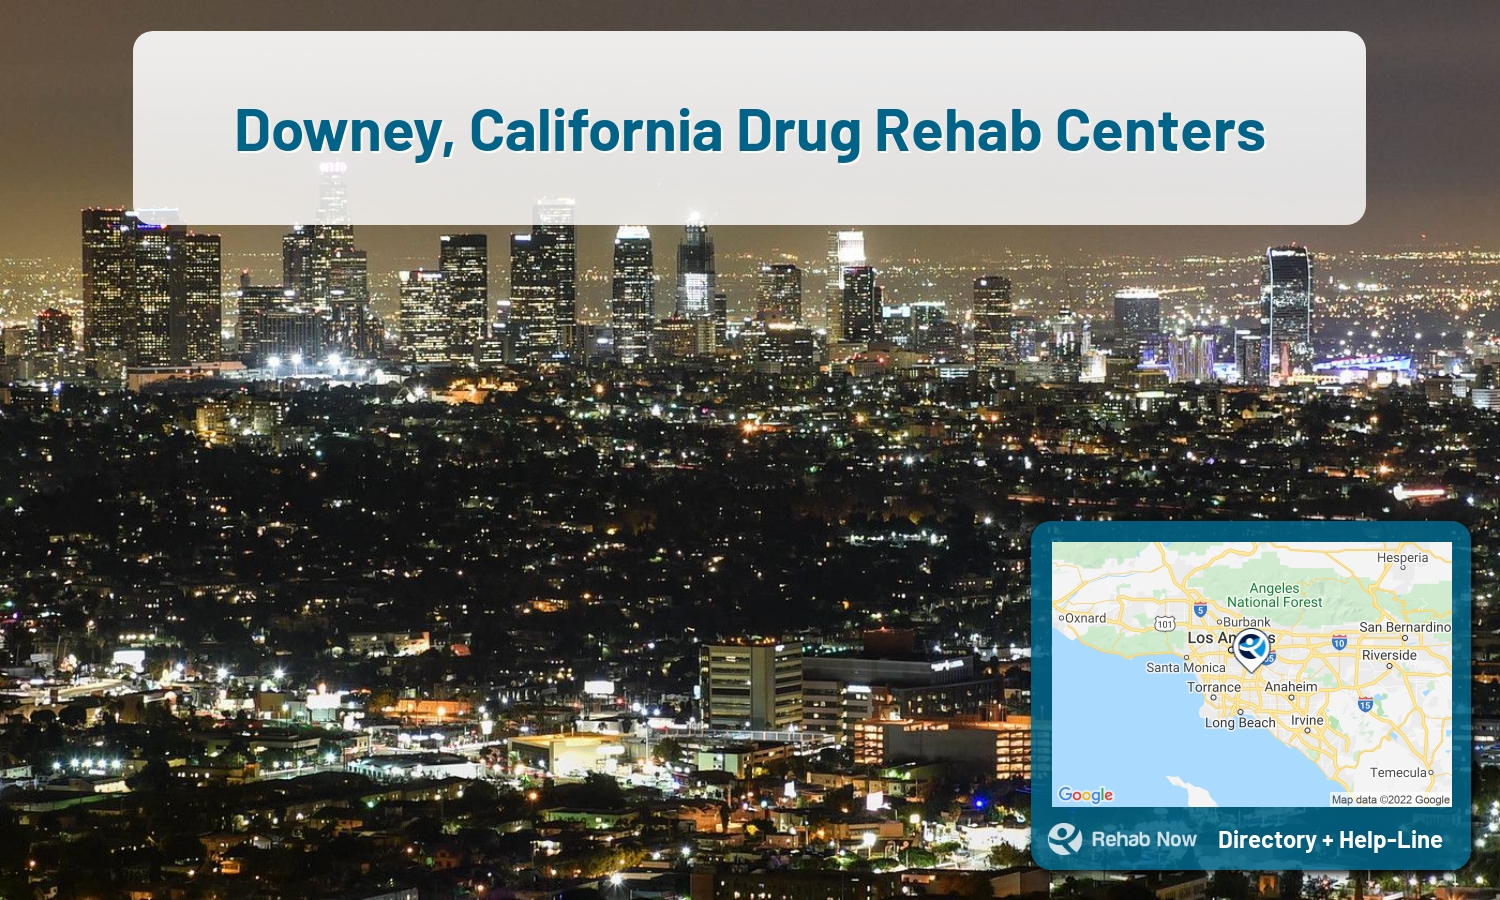 Ready to pick a rehab center in Downey? Get off alcohol, opiates, and other drugs, by selecting top drug rehab centers in California